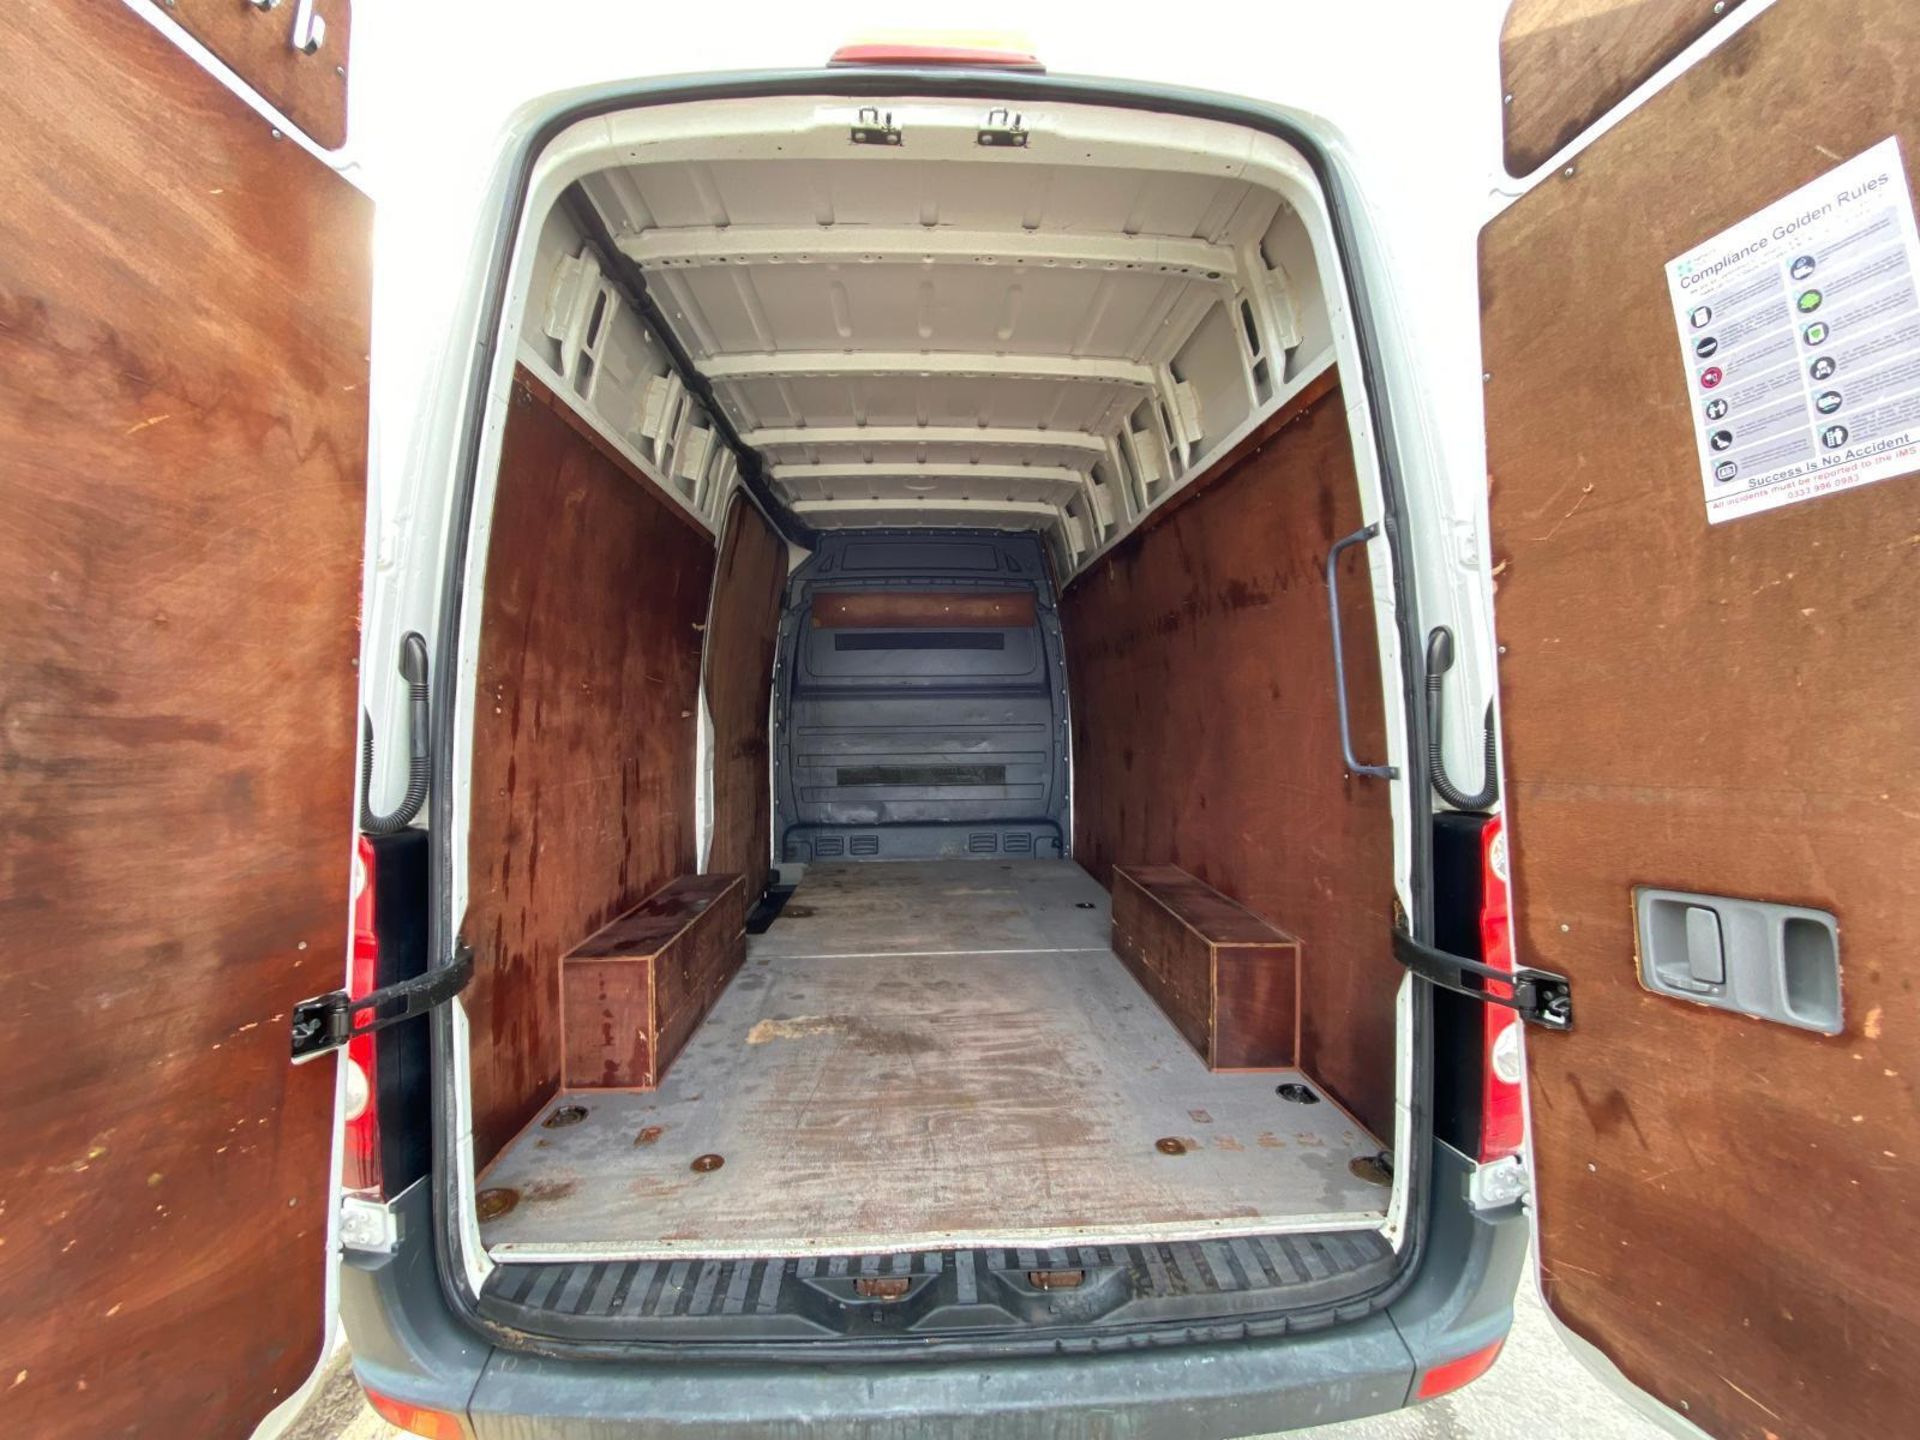 2016 VOLKSWAGEN CRAFTER 2.0 CR35 EURO 6 MWB - Image 5 of 8